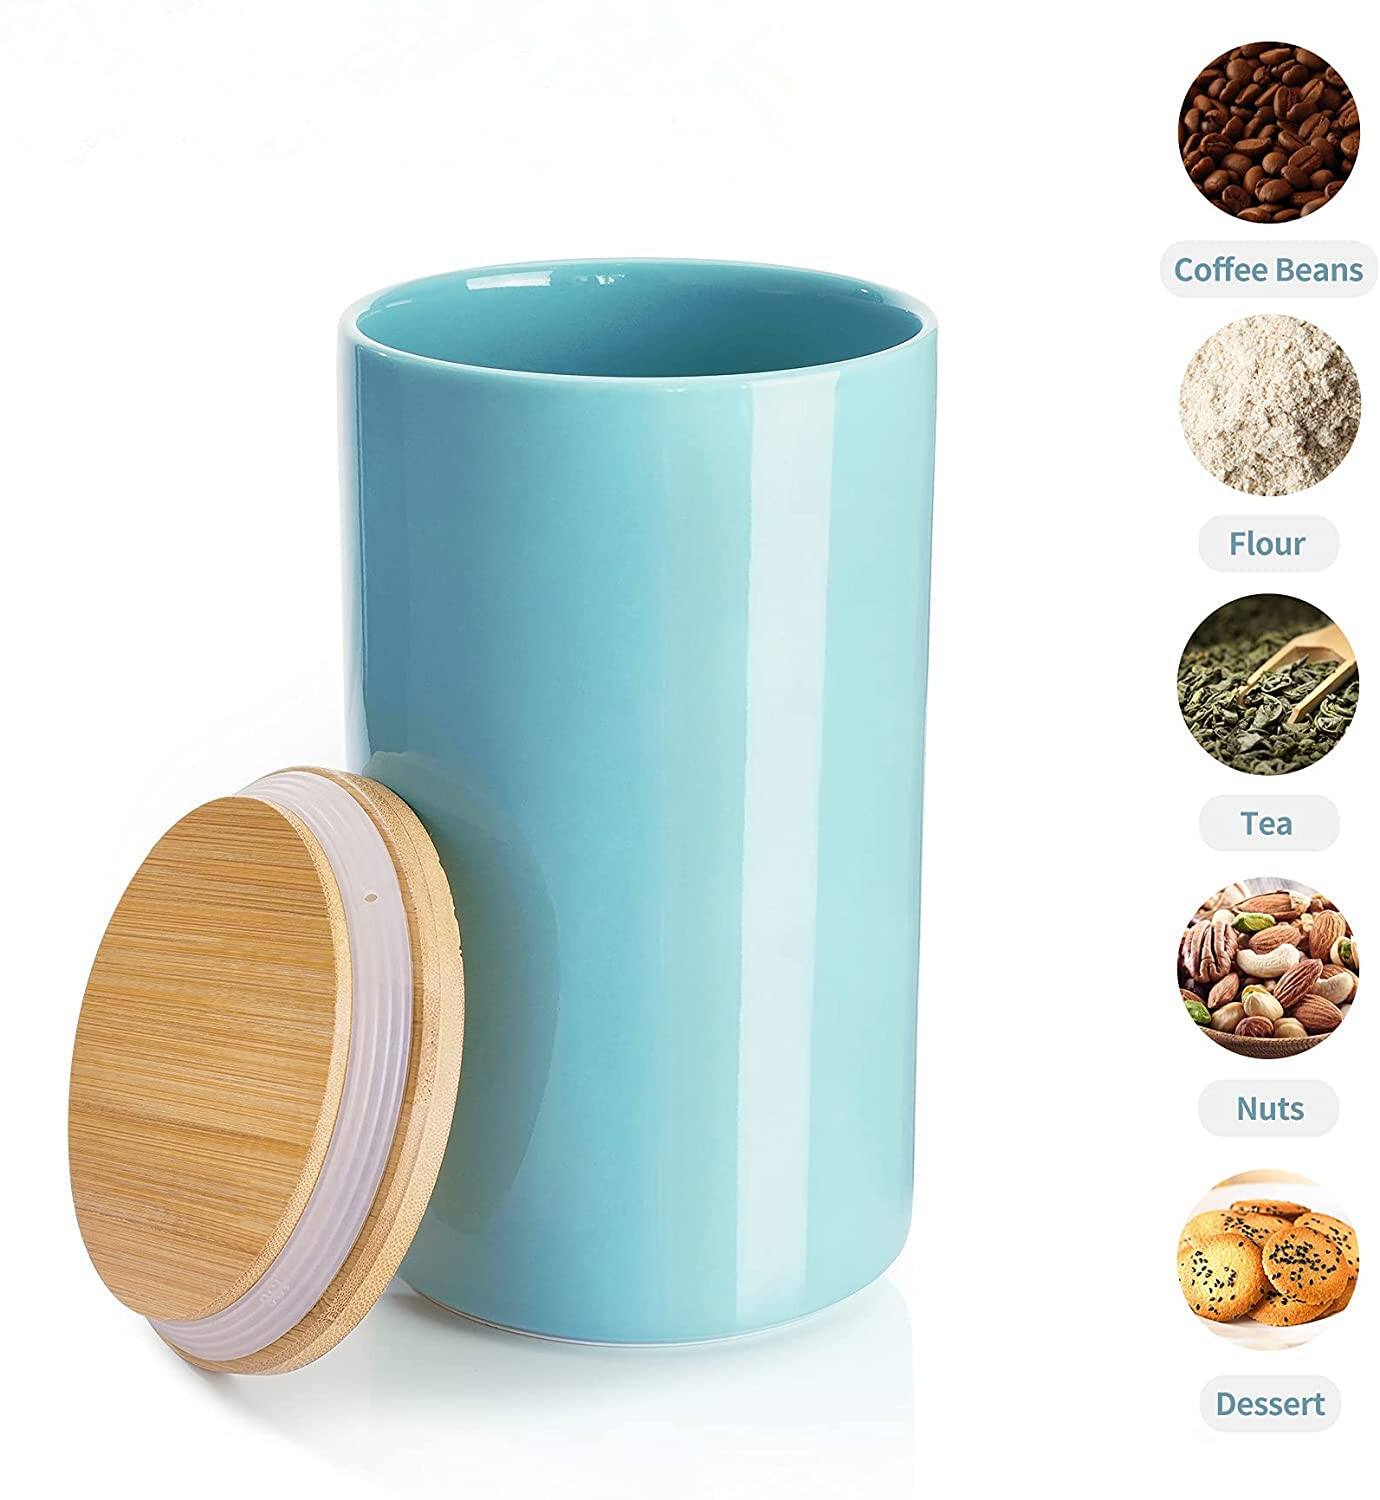 Sweese 65oz/1930ml Porcelain Food Storage Jar with Bamboo Lid (Navy or Turquoise) $14.39